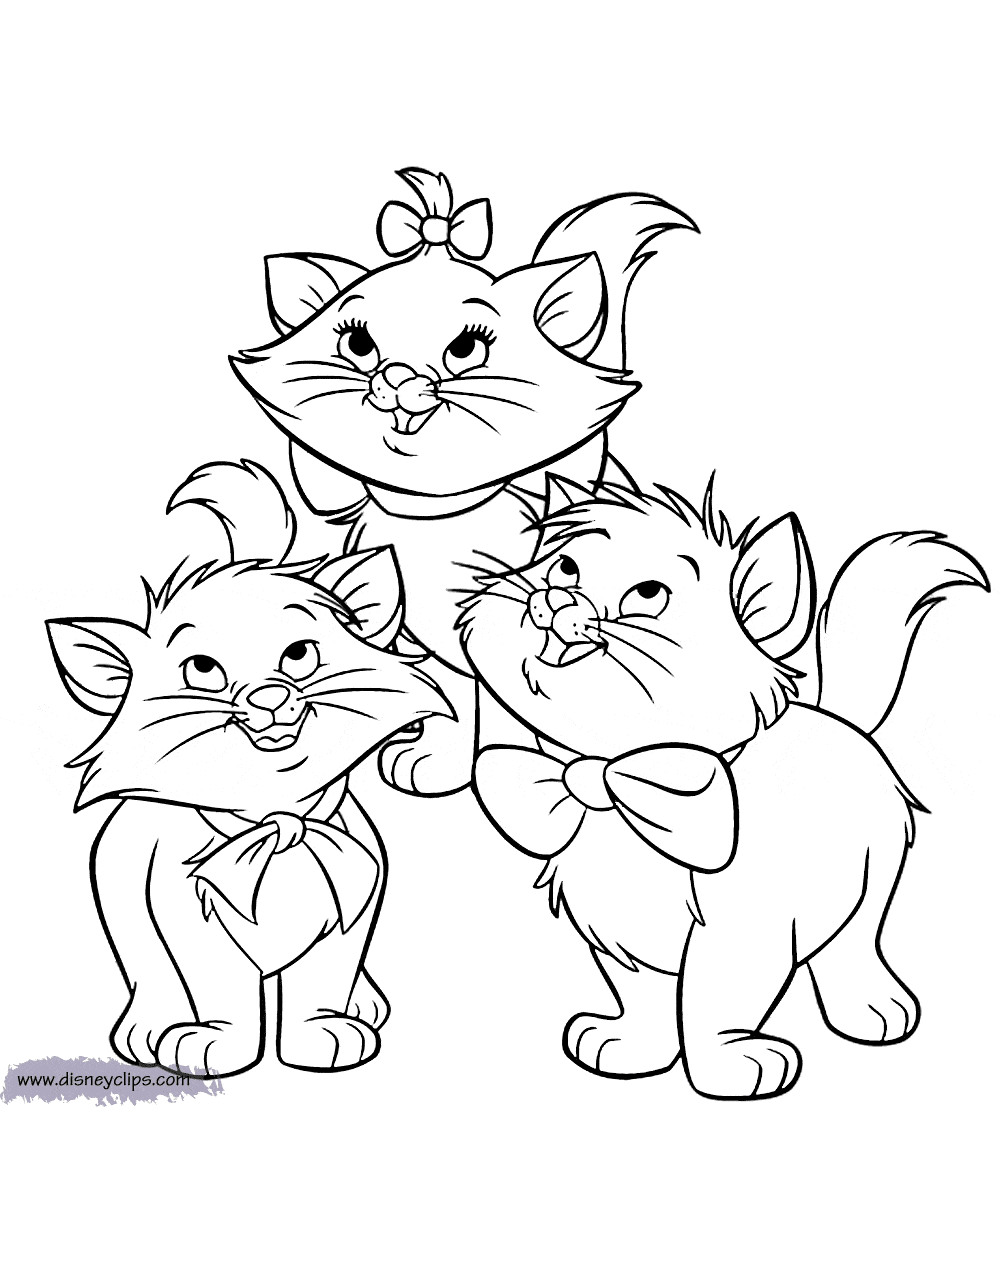 Aristocats Free Coloring Pages   Coloring Cool